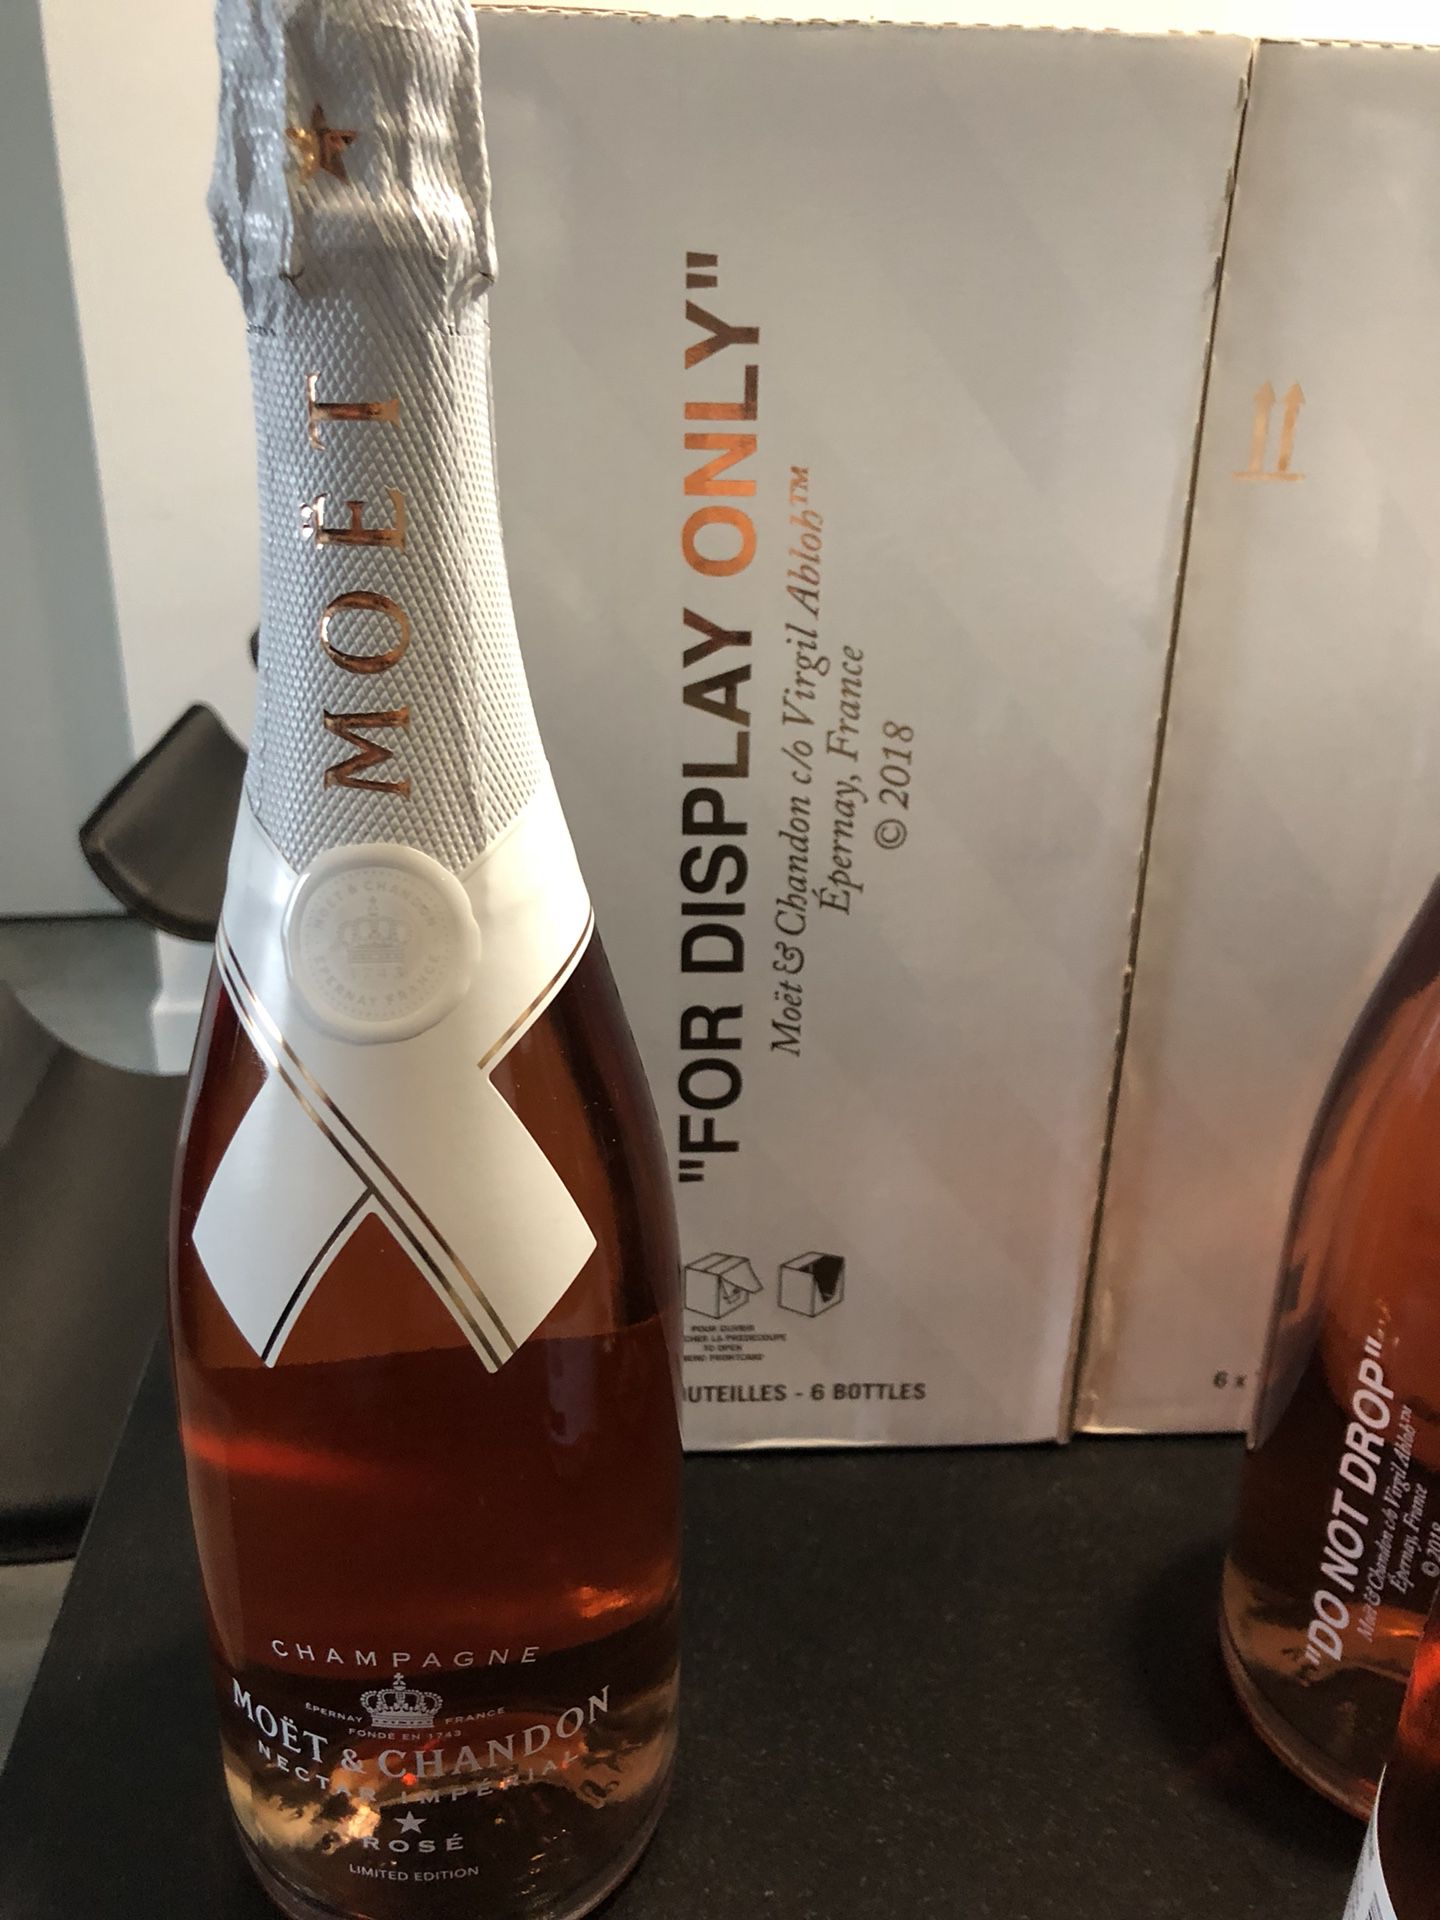 Del Mesa Liquor - Sunday Funday with the new @moetchandon Nectar Imperial  Rose Off-White c/o Virgil Abloh Limited Edition Bottle! Now available in  store and online. The long awaited designer champagne bottle